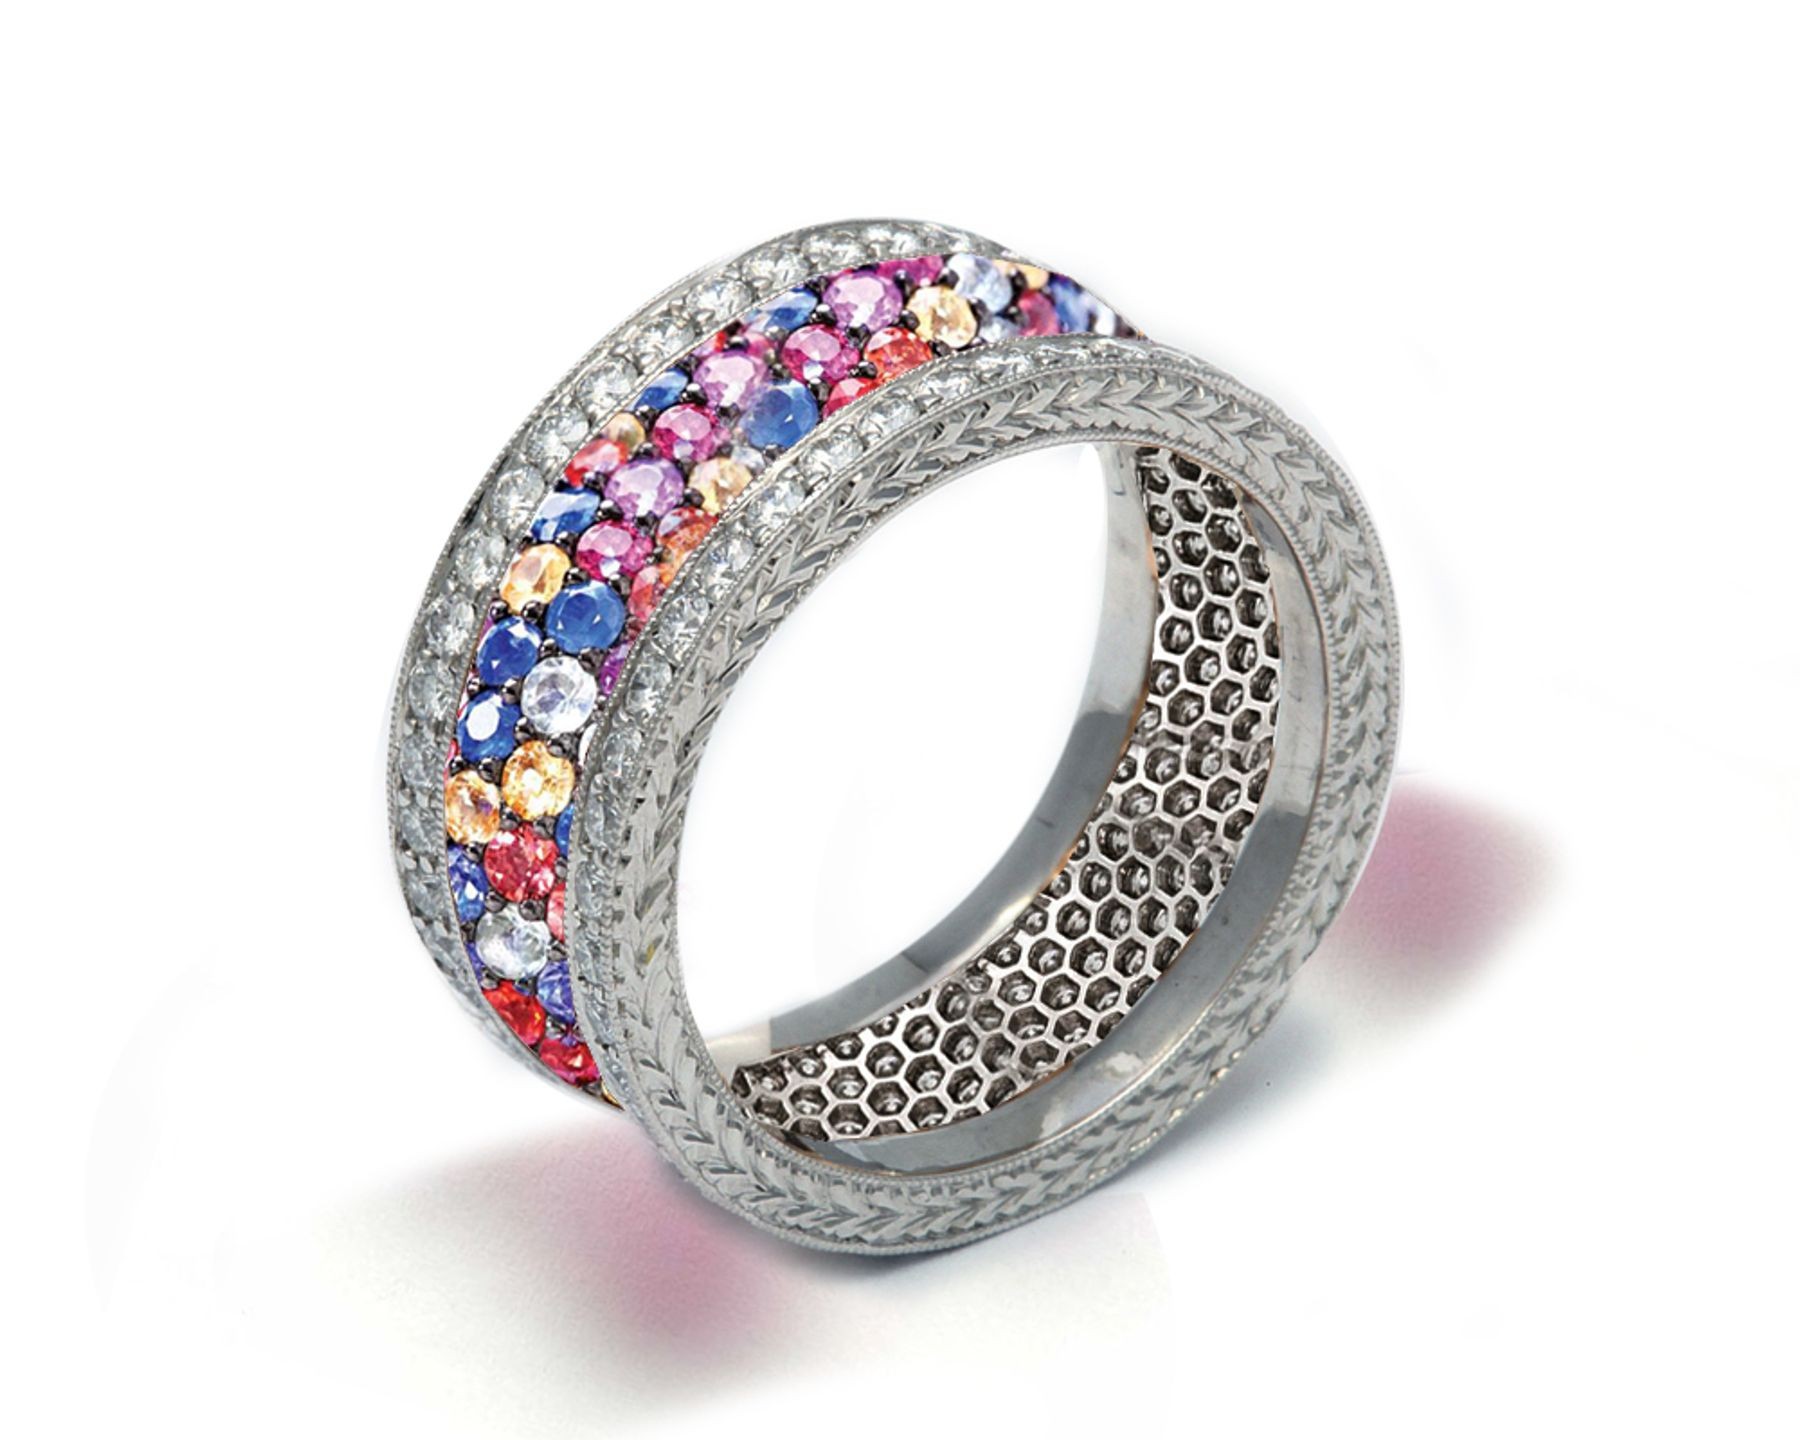 Delicate Women's Eternity Rings Featuring Multi-Colored Diamonds and Gemstones in Halo Precision Micro pave Settings